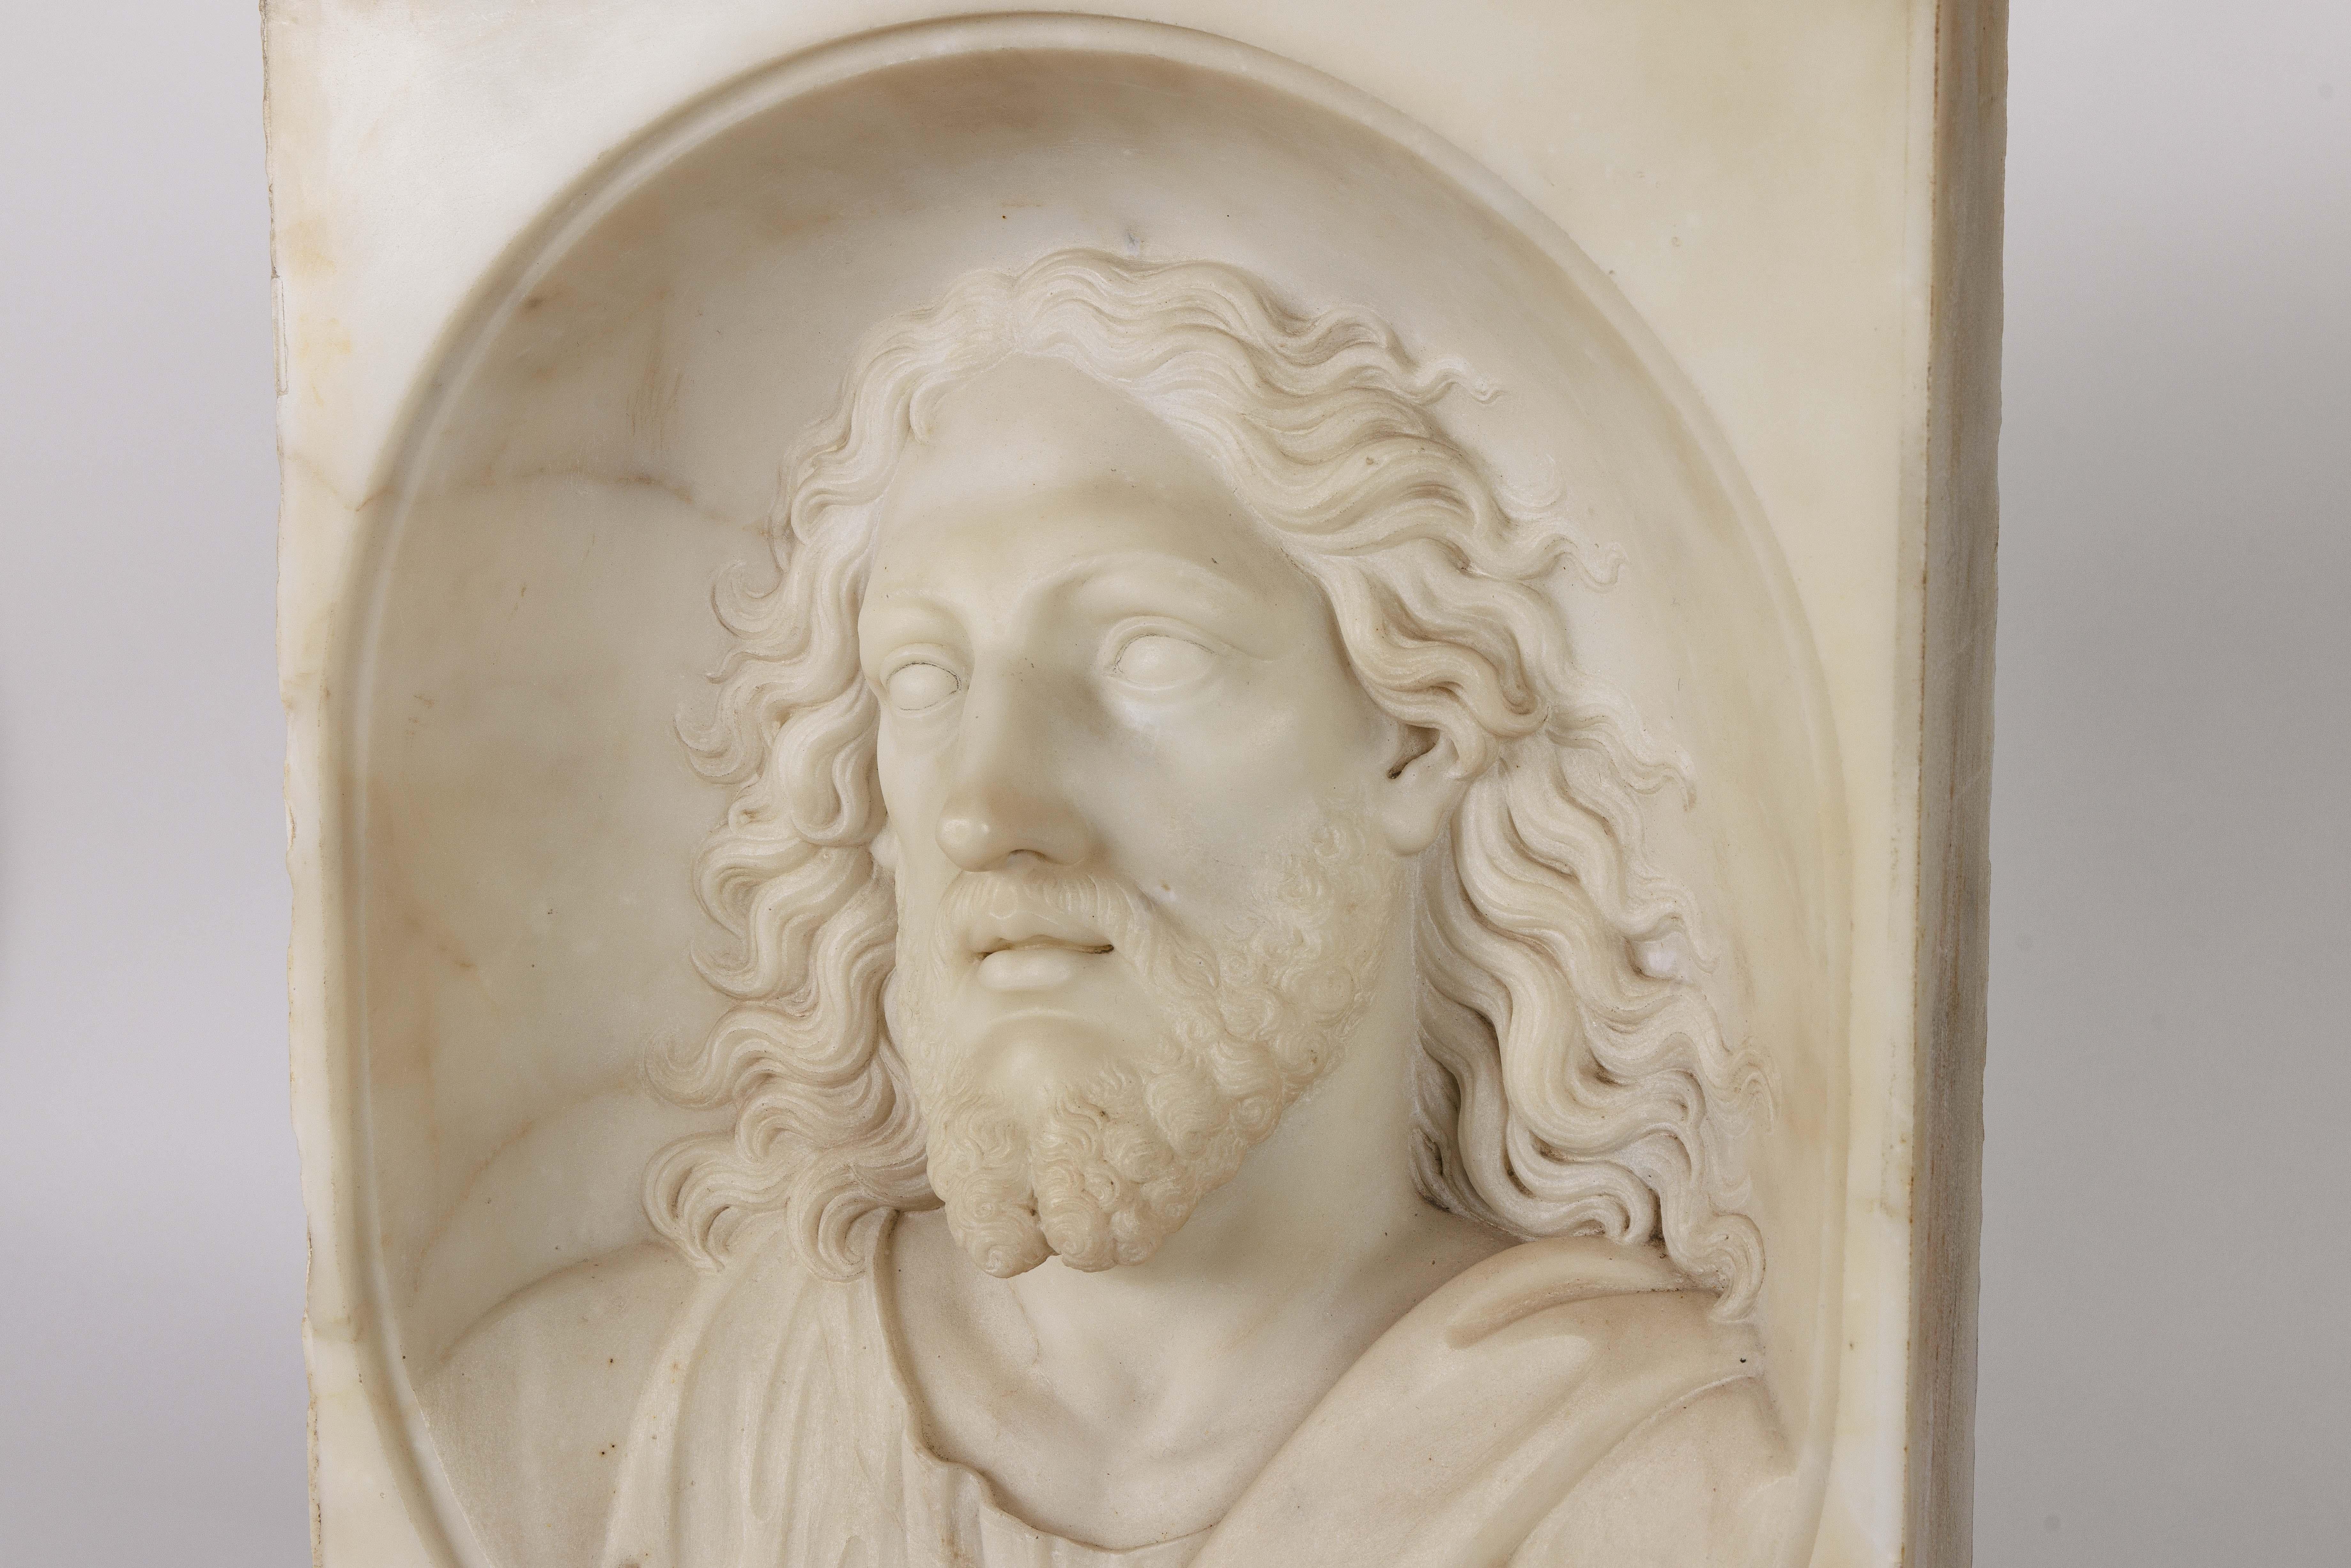 Rare and important Italian white marble bust sculpture of Jesus Christ, C. 1850.

A truly exceptionally carved marble relief of Holy Jesus Christ. Very powerful and dramatic- a museum worthy sculpture.

Unsigned, but definitely by a master